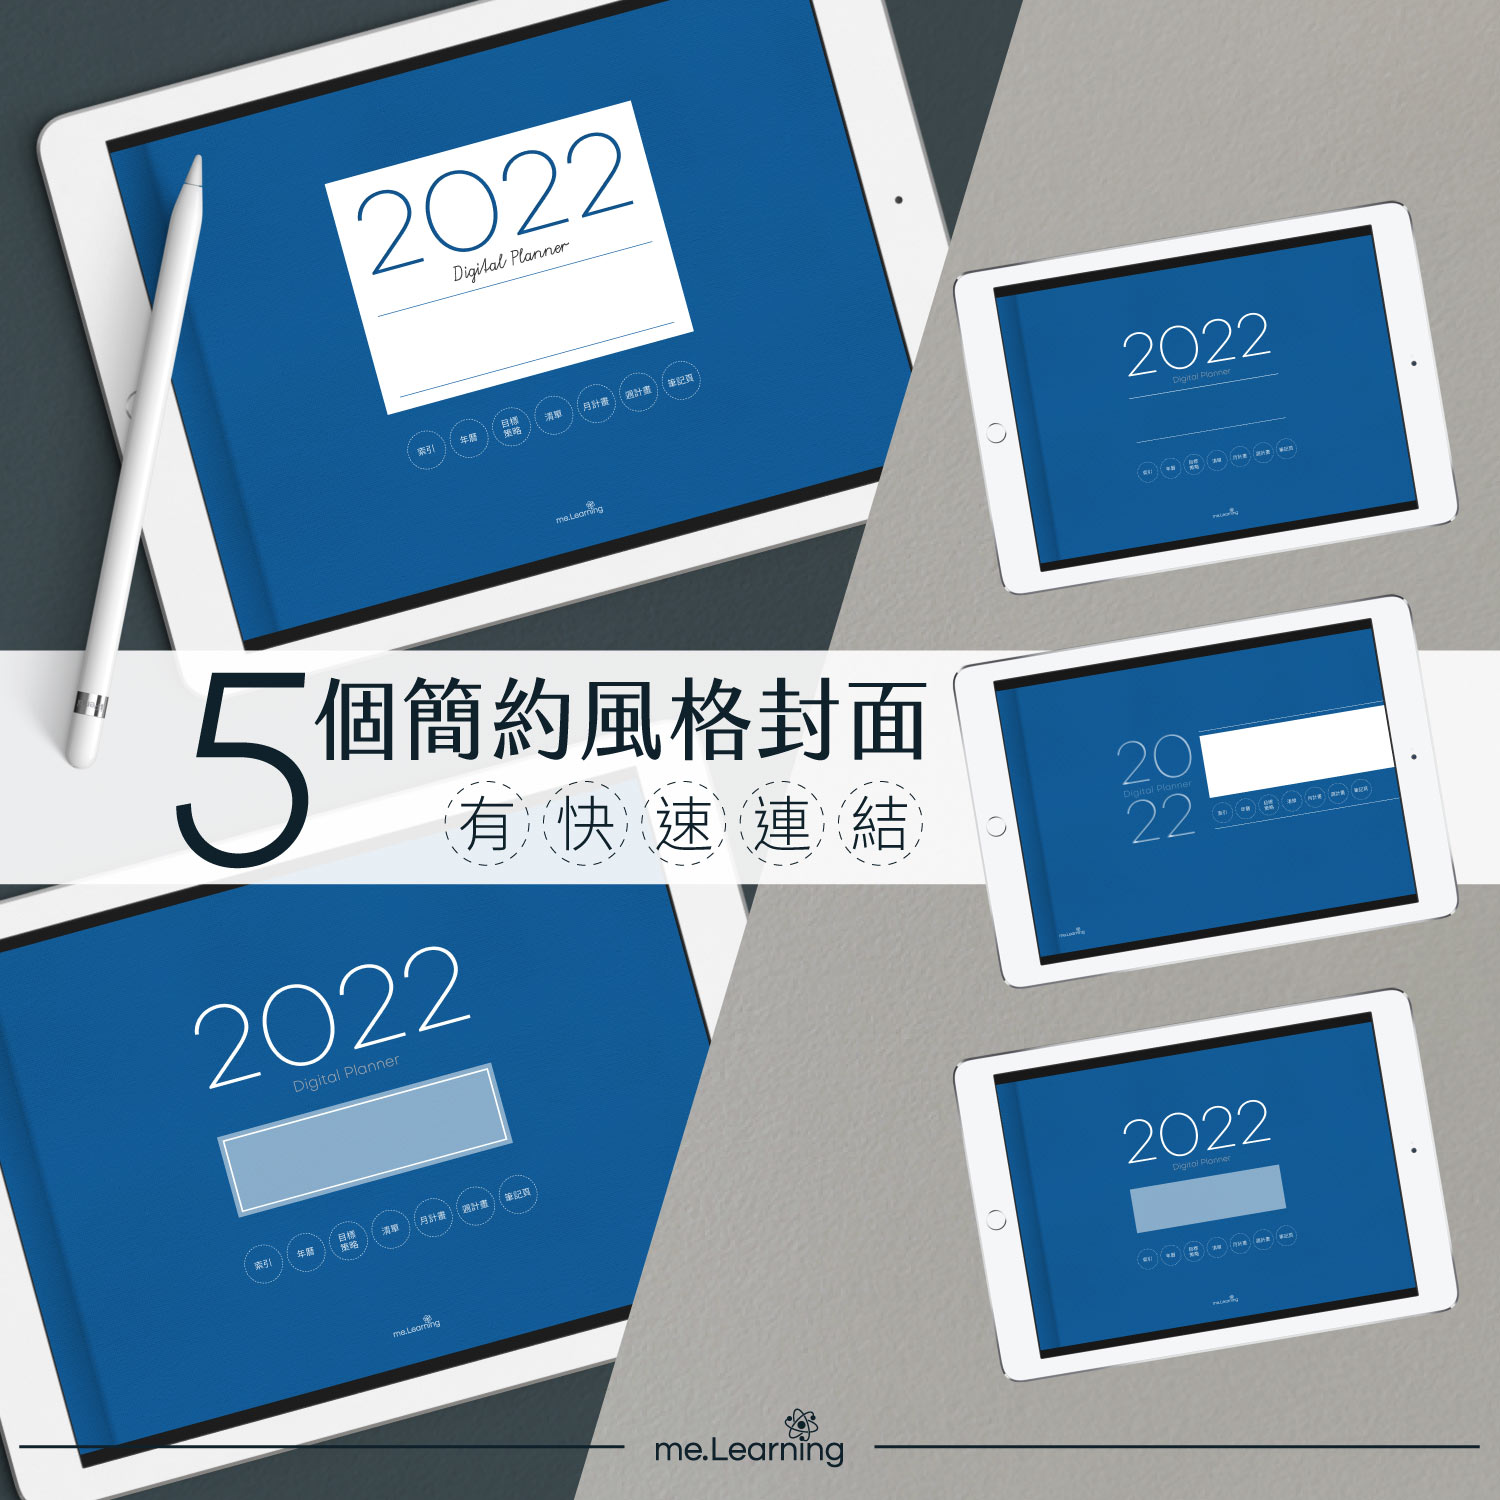 iPad digital planner 2022-Yearly-Classic Blue 5款簡約風格封面 | me.Learning